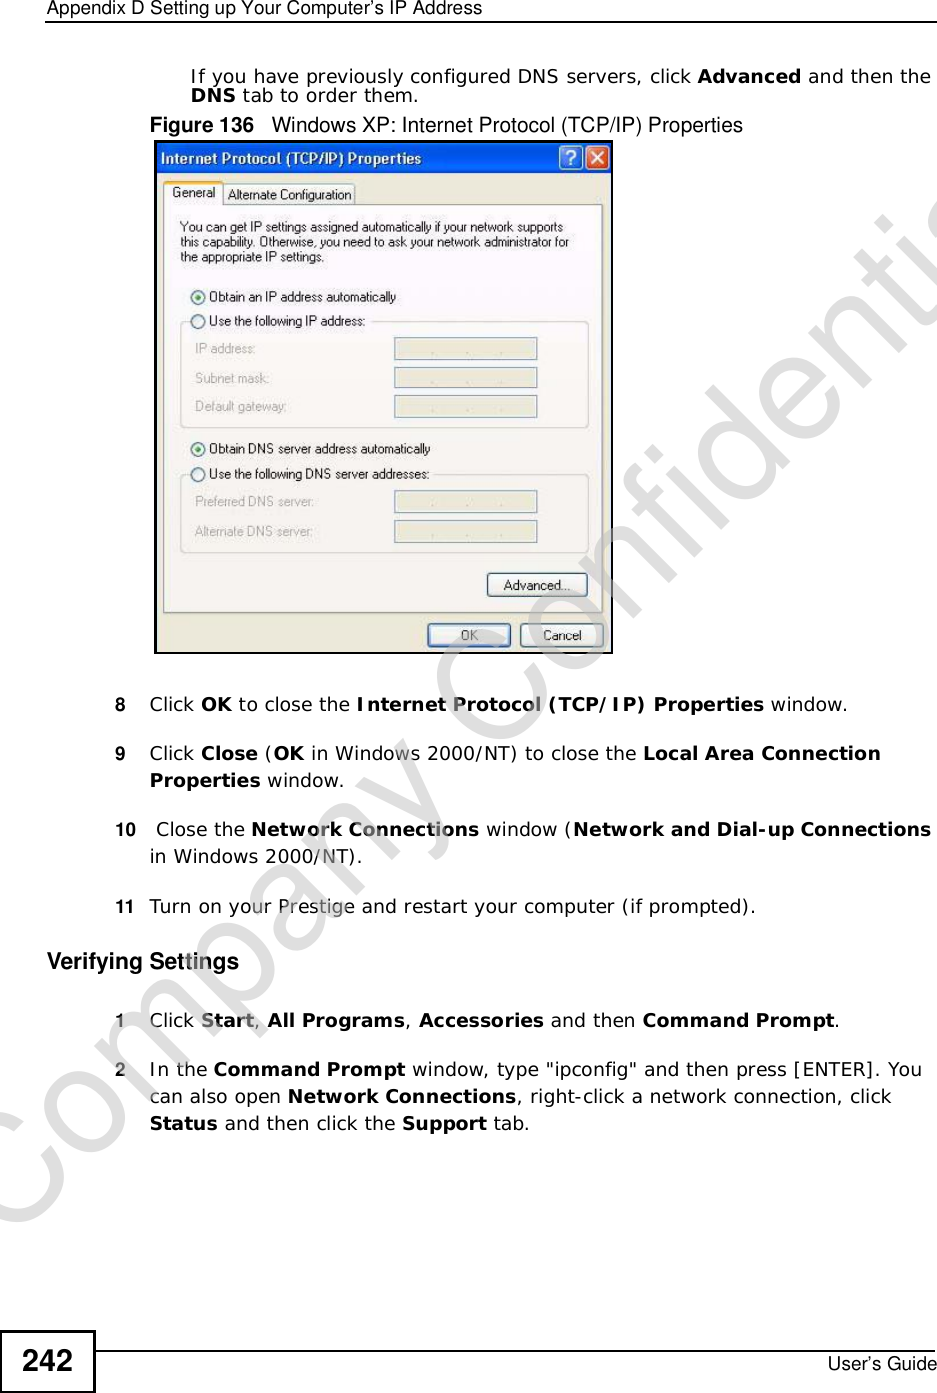 Appendix DSetting up Your Computer’s IP AddressUser’s Guide242If you have previously configured DNS servers, click Advanced and then the DNS tab to order them.Figure 136   Windows XP: Internet Protocol (TCP/IP) Properties8Click OK to close the Internet Protocol (TCP/IP) Properties window.9Click Close (OK in Windows 2000/NT) to close the Local Area Connection Properties window.10  Close the Network Connections window (Network and Dial-up Connections in Windows 2000/NT).11 Turn on your Prestige and restart your computer (if prompted).Verifying Settings1Click Start,All Programs,Accessories and then Command Prompt.2In the Command Prompt window, type &quot;ipconfig&quot; and then press [ENTER]. You can also open Network Connections, right-click a network connection, click Status and then click the Support tab.Company Confidential